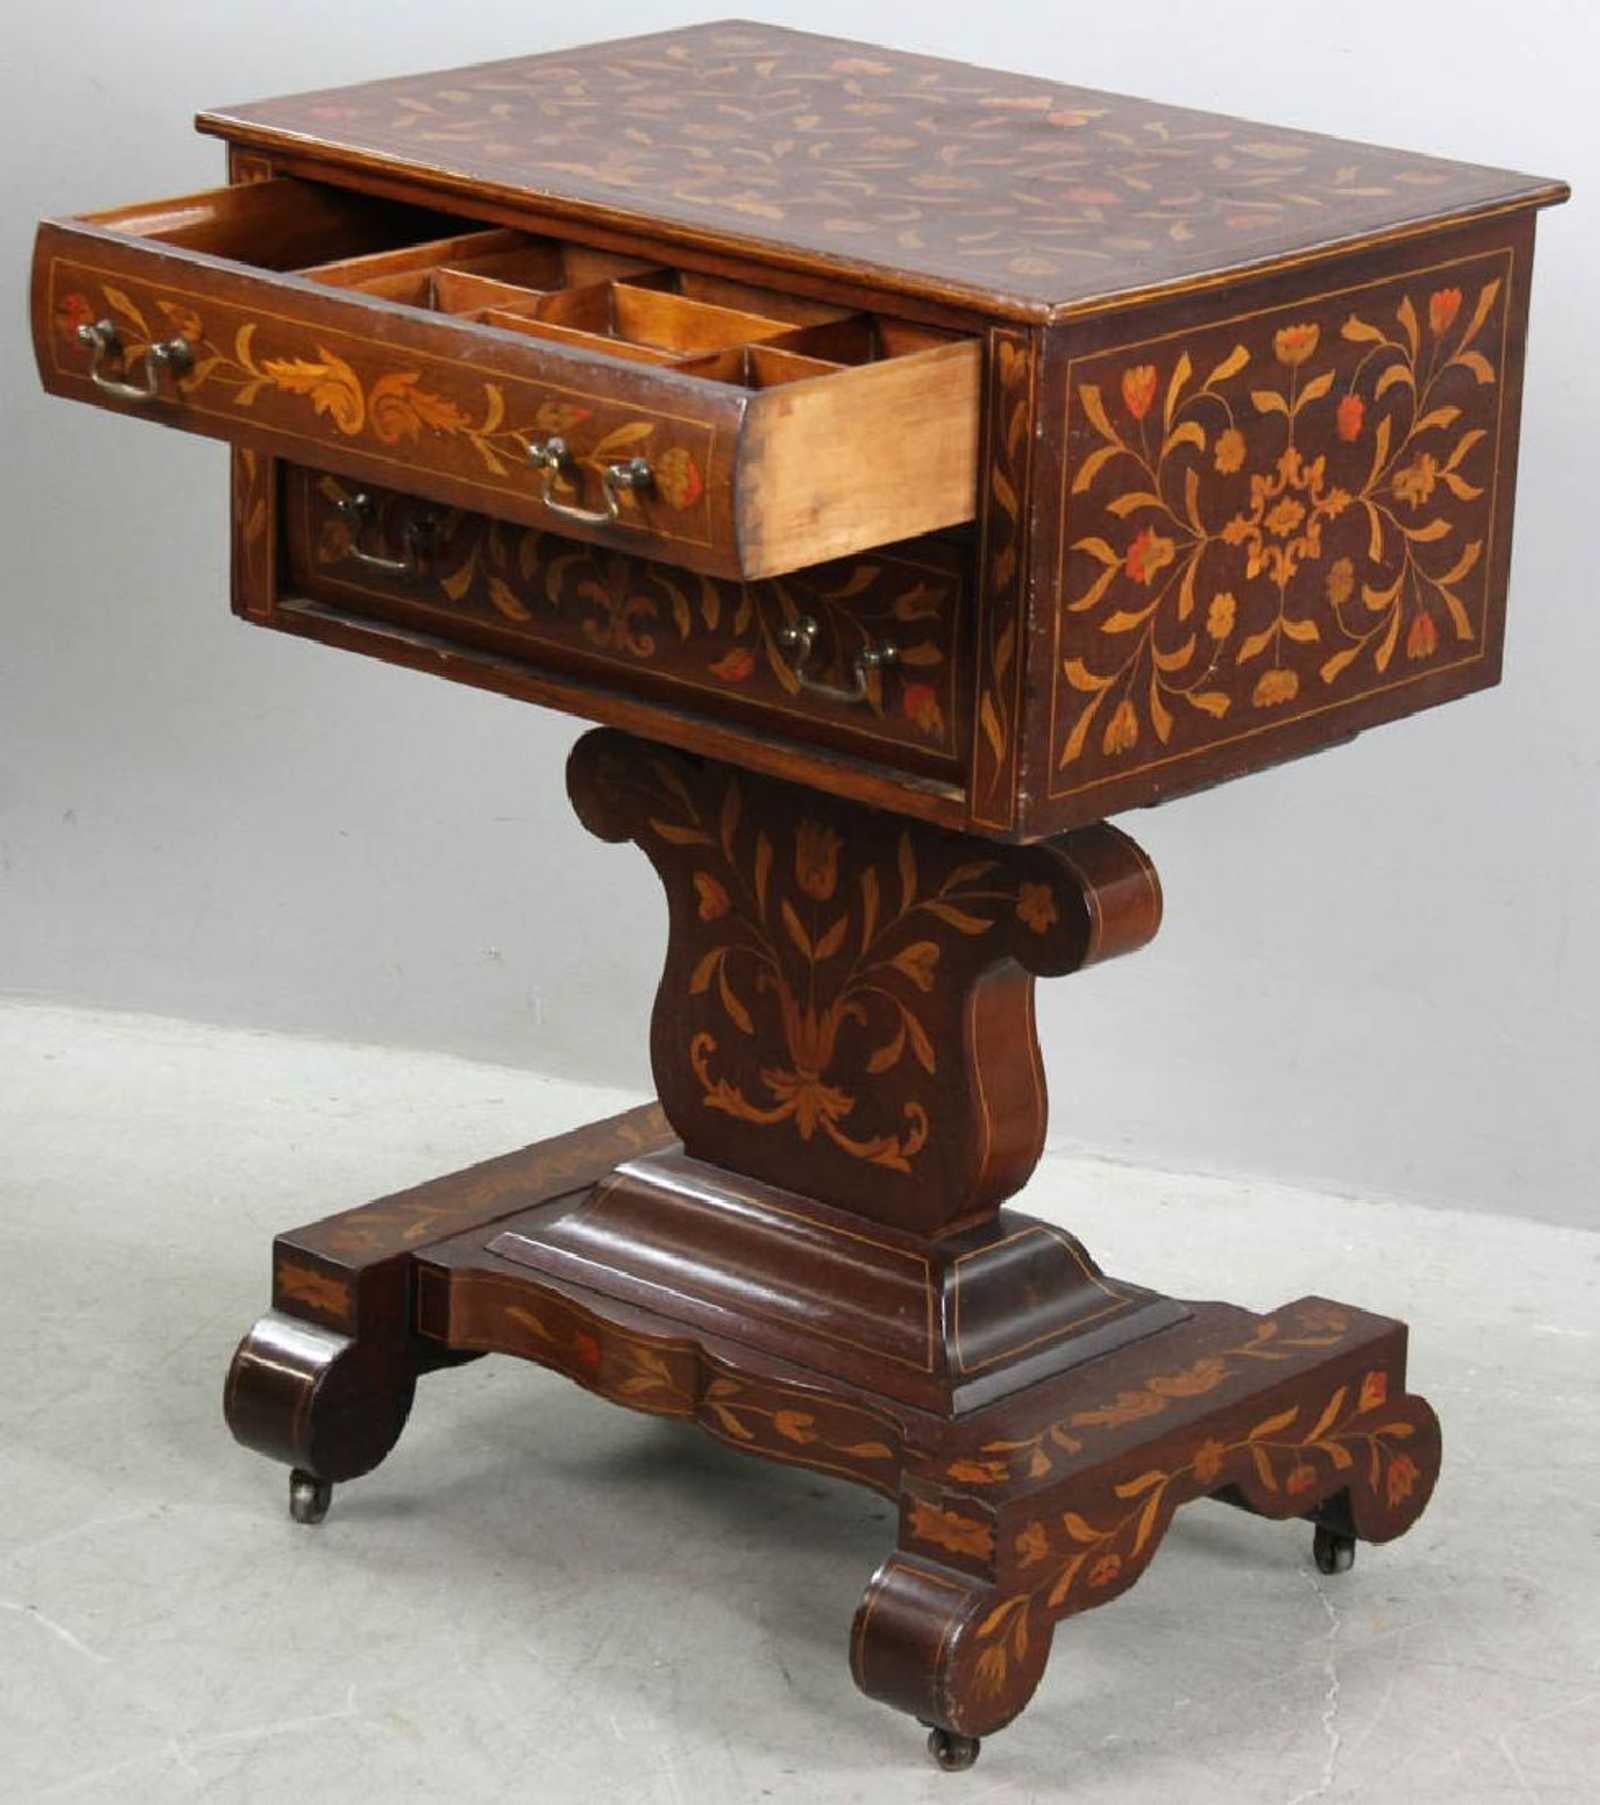 Mid-19th Century Dutch Empire Marquetry Stand in Mahogany and Fruitwood, circa 1840 For Sale